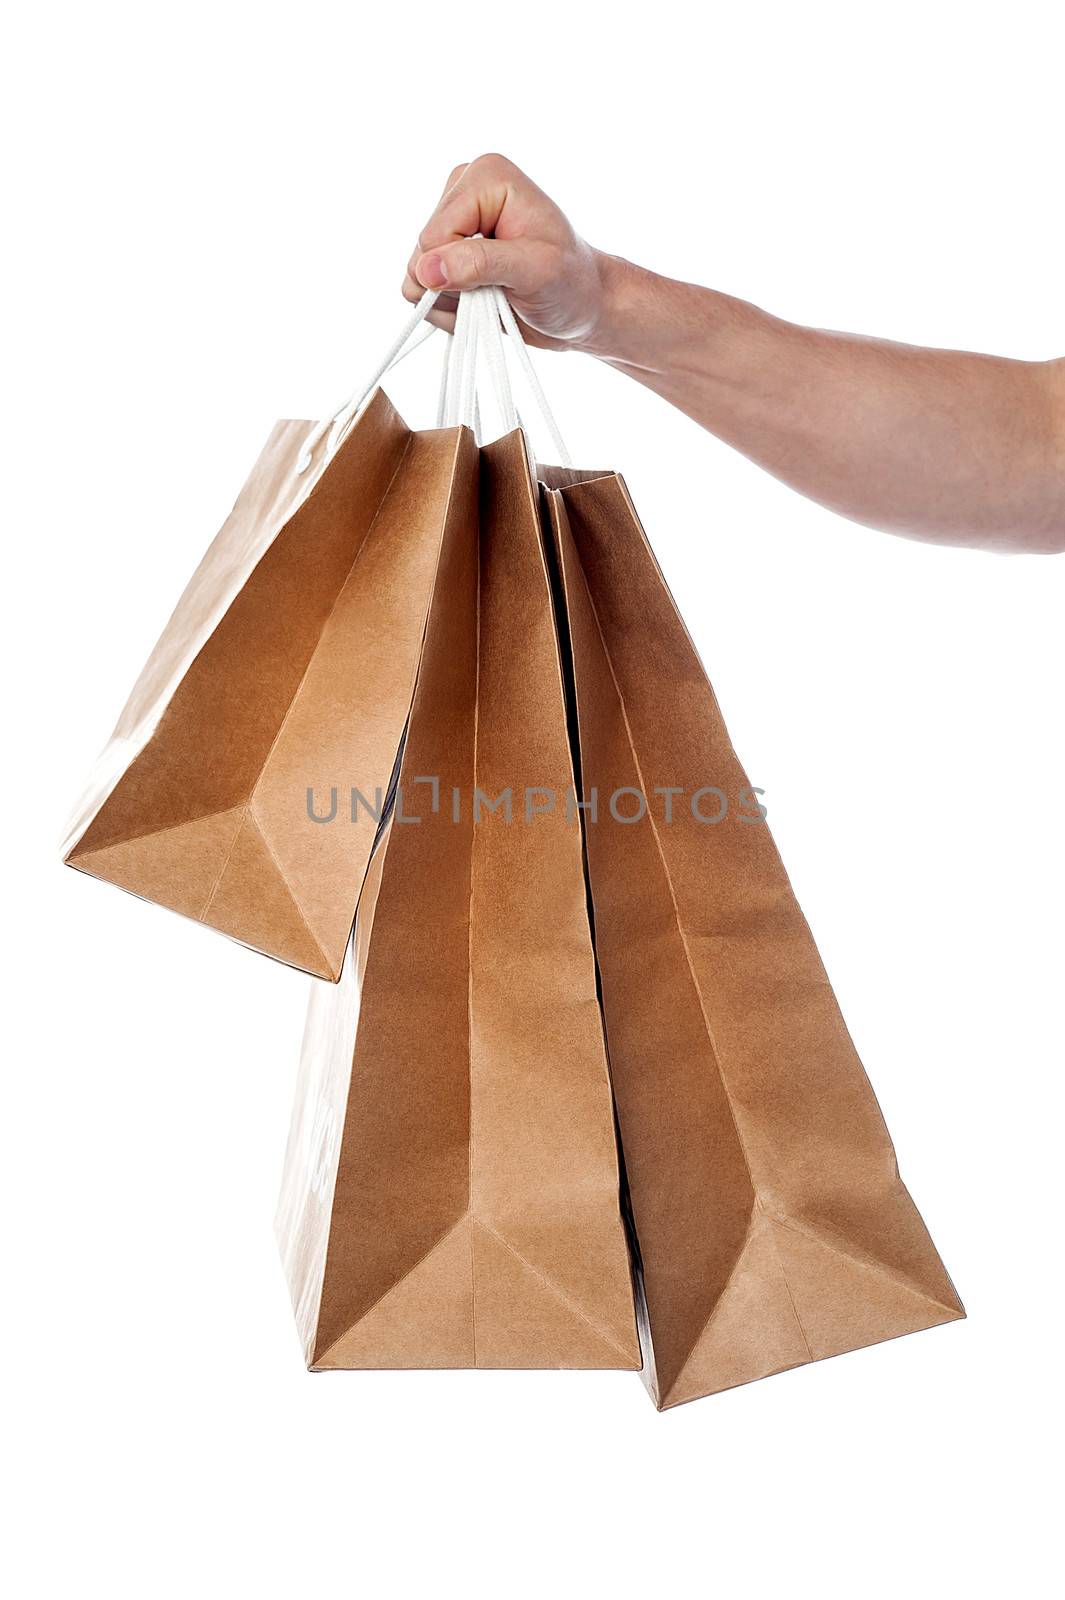 Mans hand holding shopping bags isolated on white